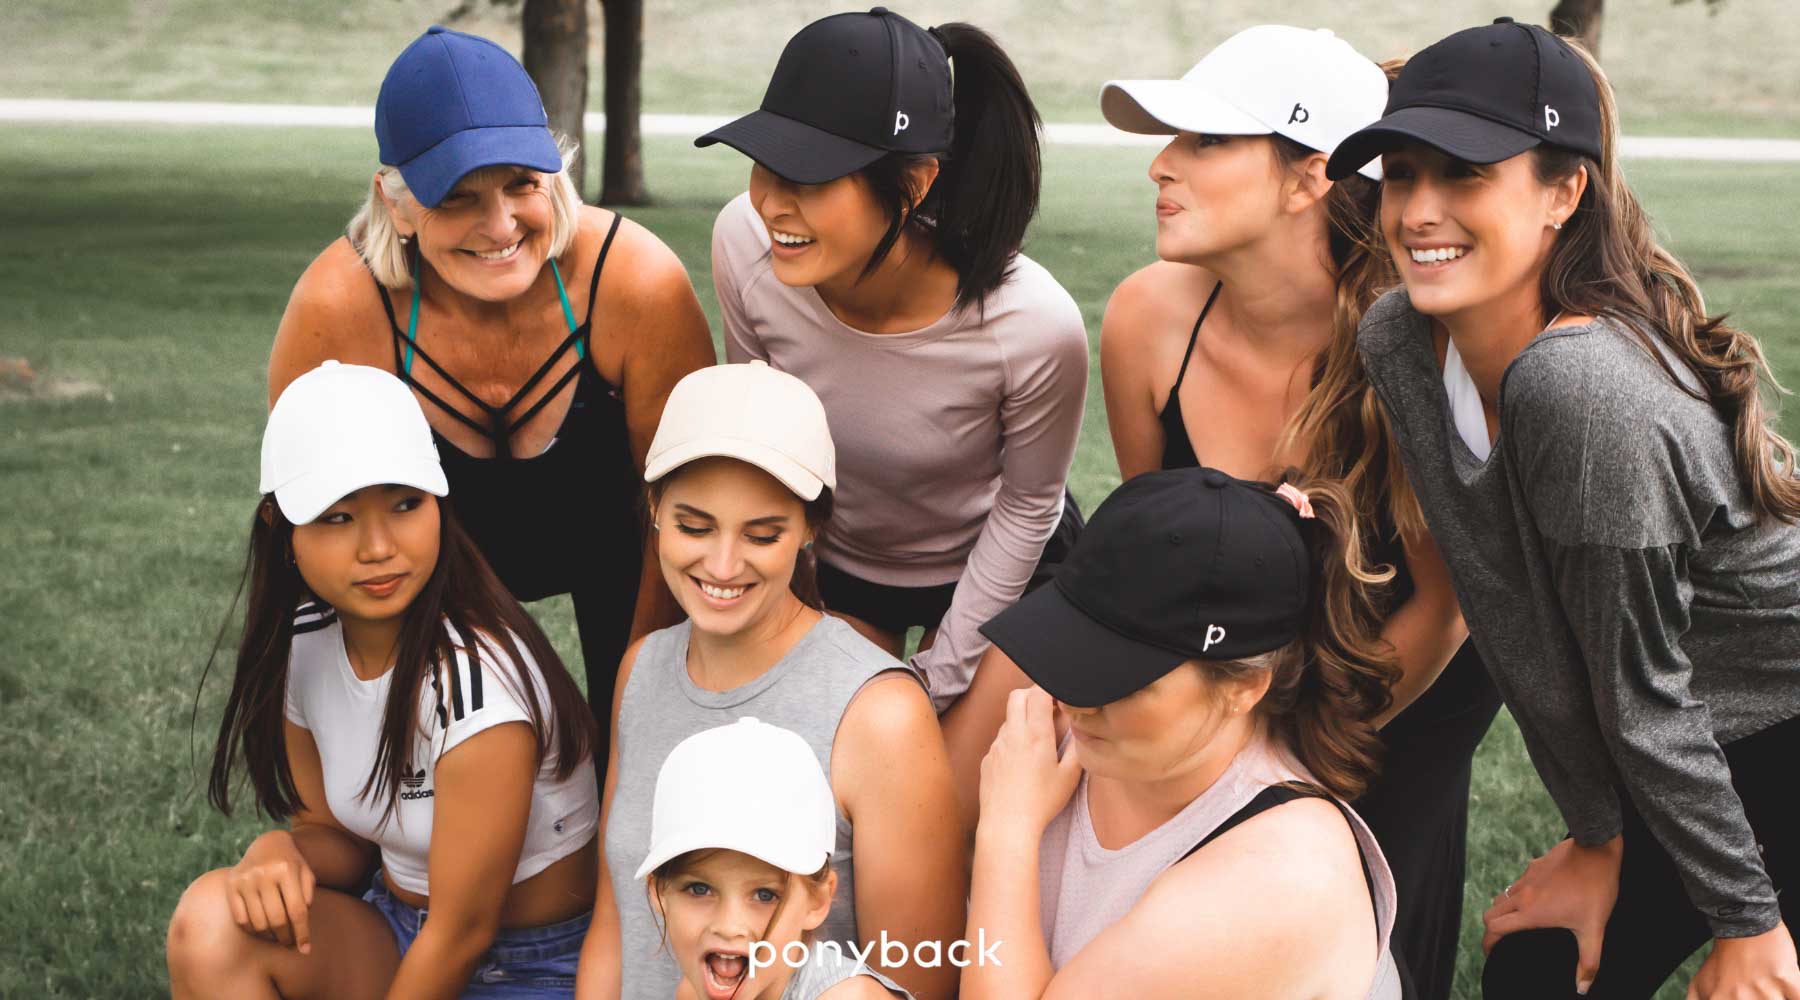 5 Reasons why Ponyback is the best hat for women